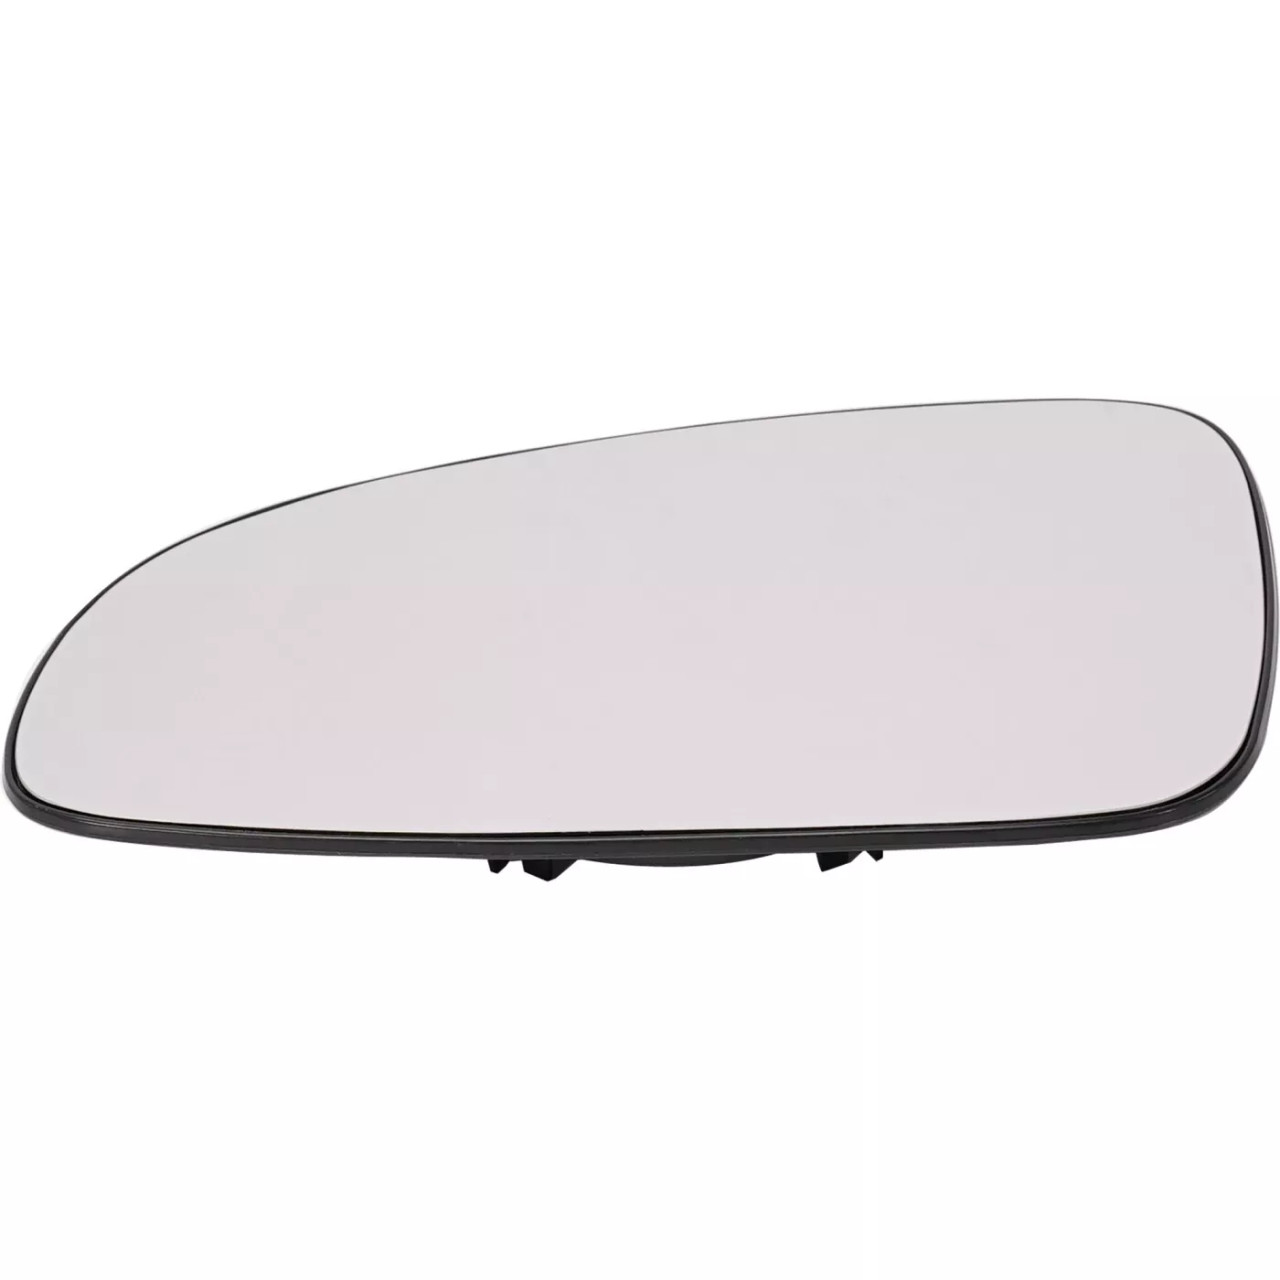 Mirror Glasses Driver Left Side Heated for Chevy Hand 96493558 Chevrolet Aveo G3